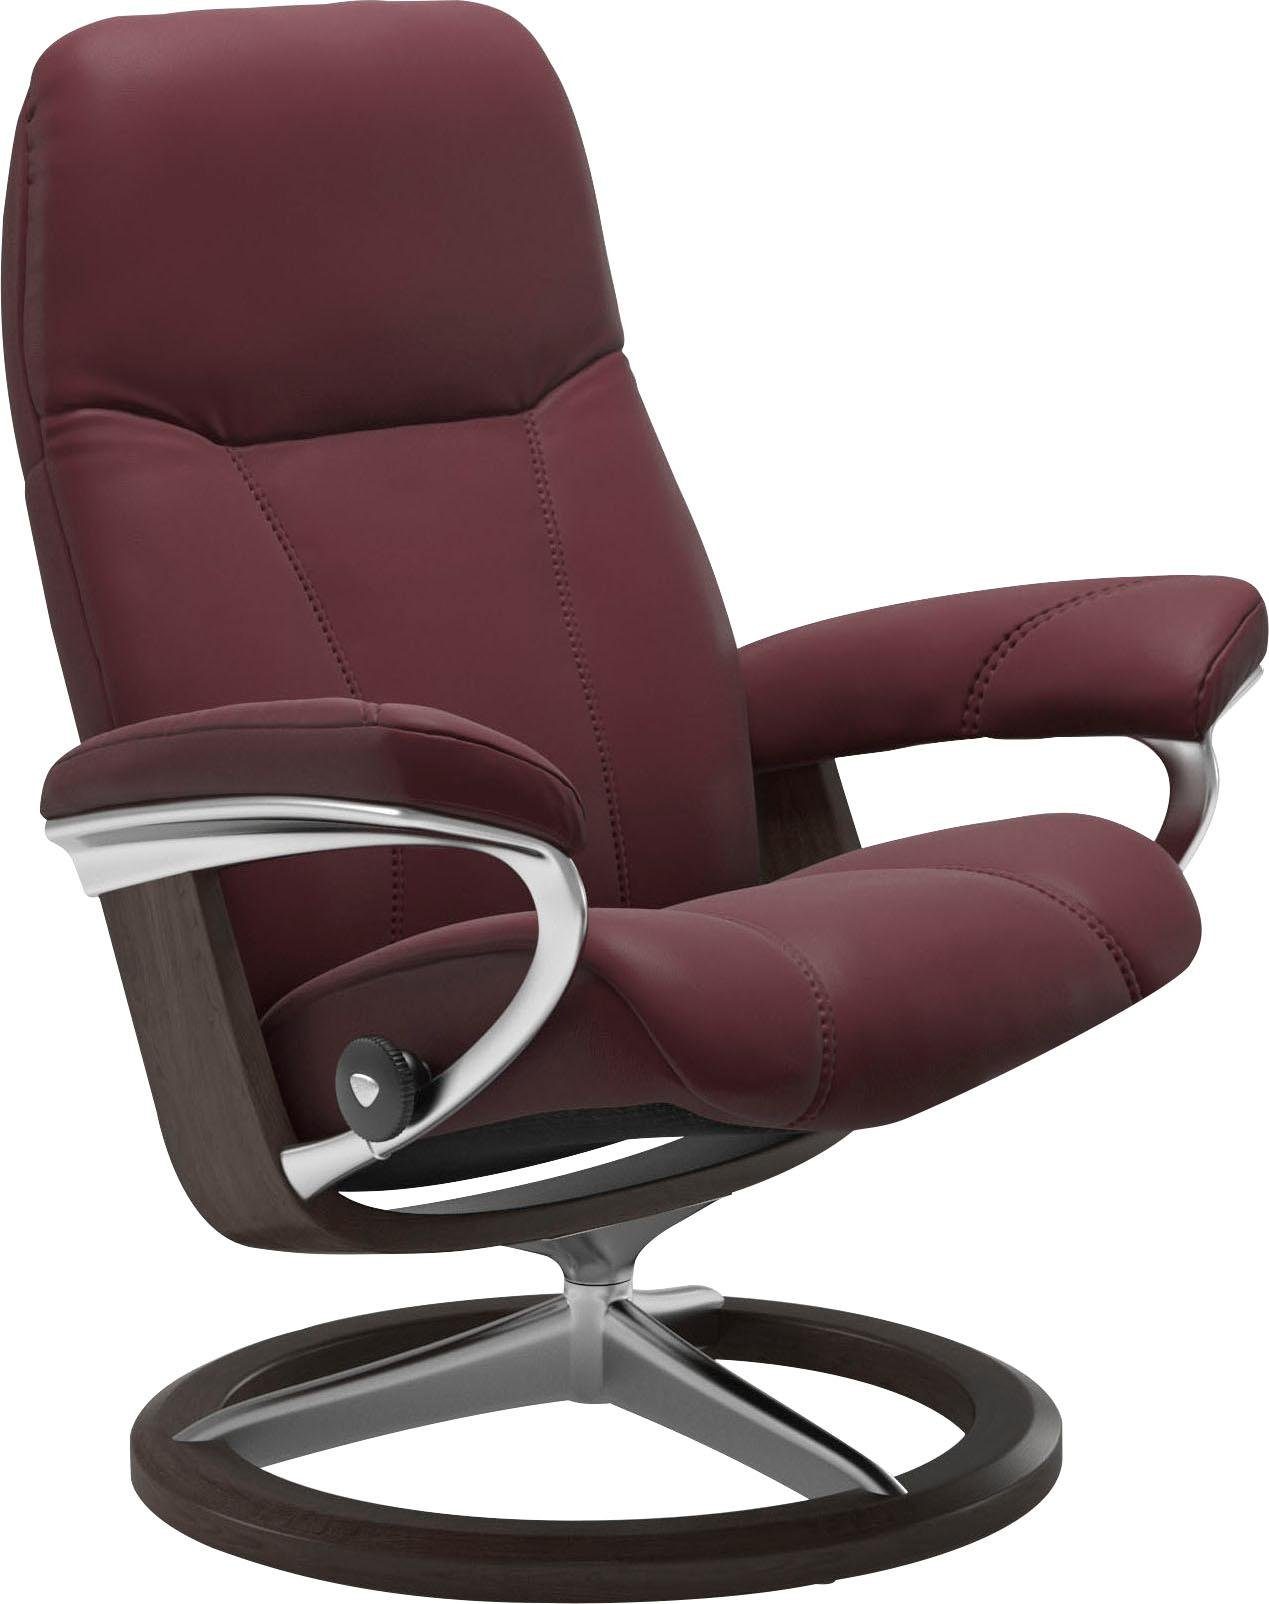 Base, Consul, mit Gestell Stressless® Relaxsessel Größe Wenge Signature S,